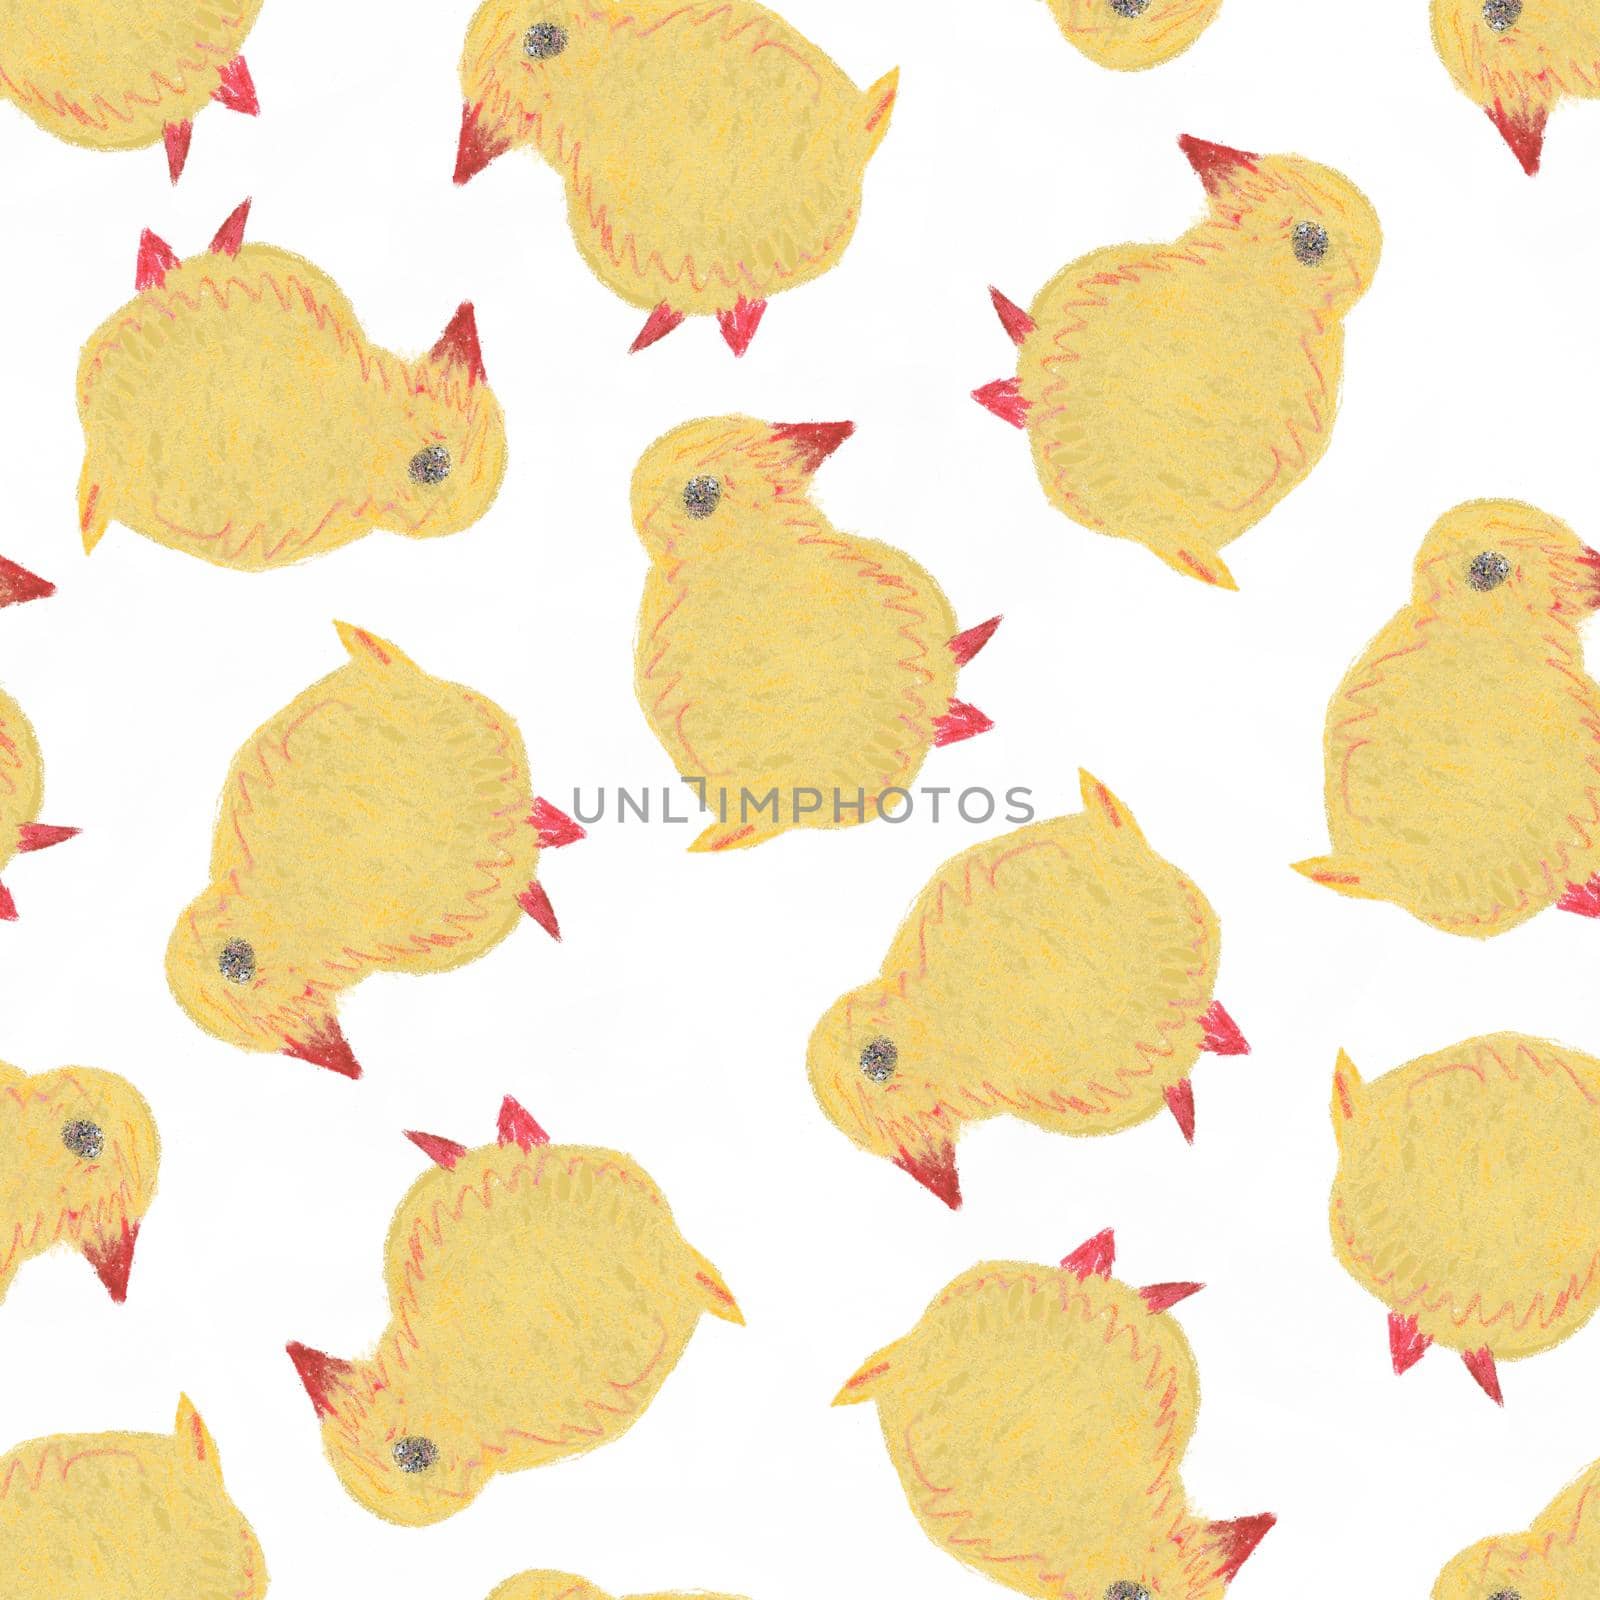 Cute Cartoon Hand Drawn Seamless Pattern With Little Yellow Chick. Funny Easter Watercolor Chicken on White Background.